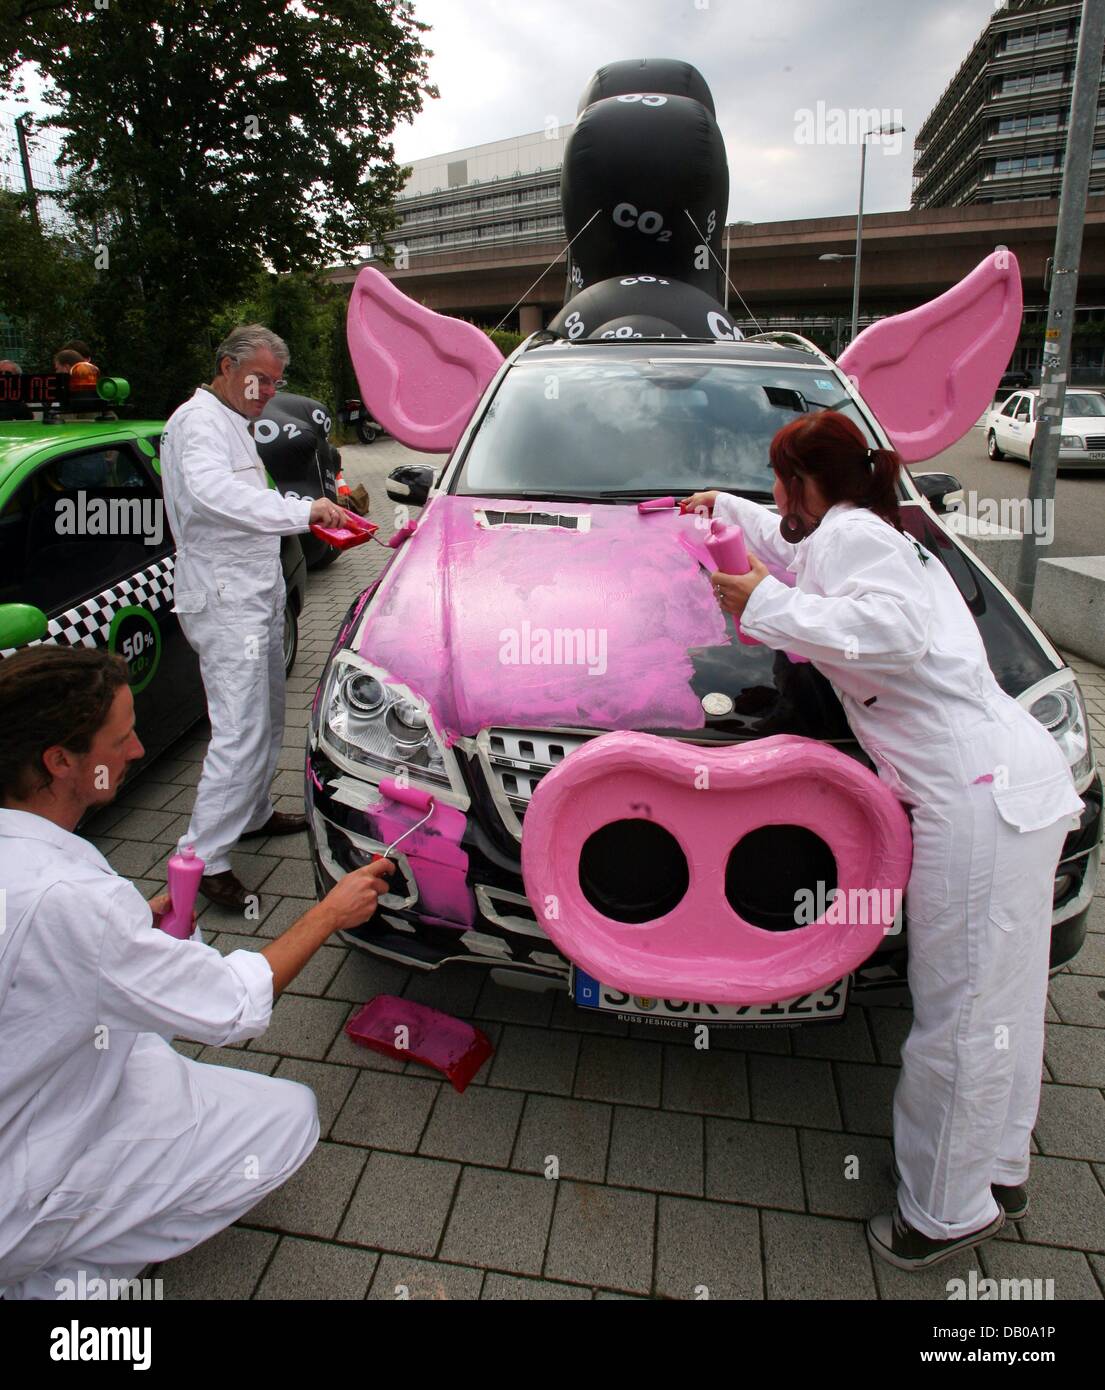 Members of environmental protection organisation 'Greenpeace' prepare a protest campaign against climate-damaging policies of automobile manufacturer DaimlerChrysler in front of the Mercedes-Benz museum in Stuttgart, Germany, 25 July 2007. For this purpose the campaigners paint two Mercedes cars in pink and decorate them with snouts and ears to symbolise pigs. Giant balloons stand  Stock Photo